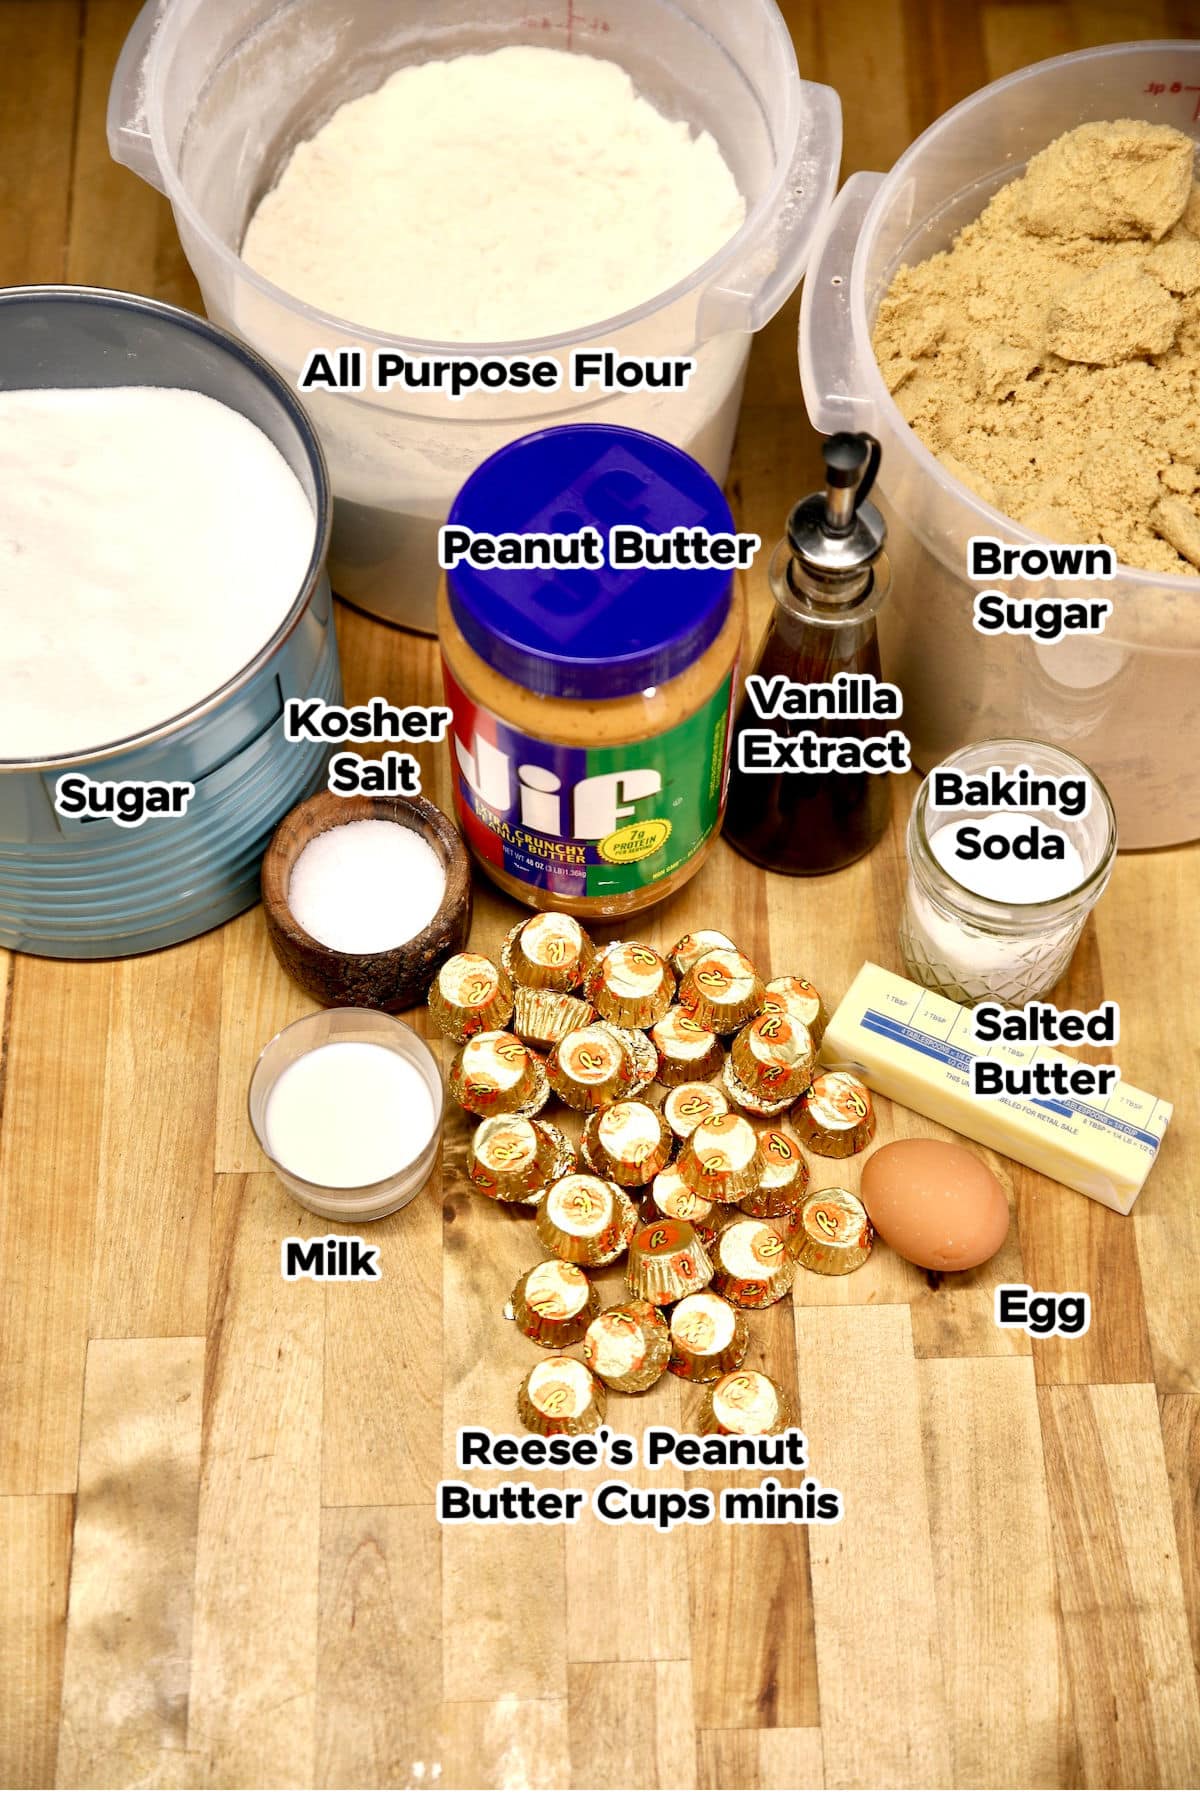 Ingredients for peanut butter cup cookies with text labeling.